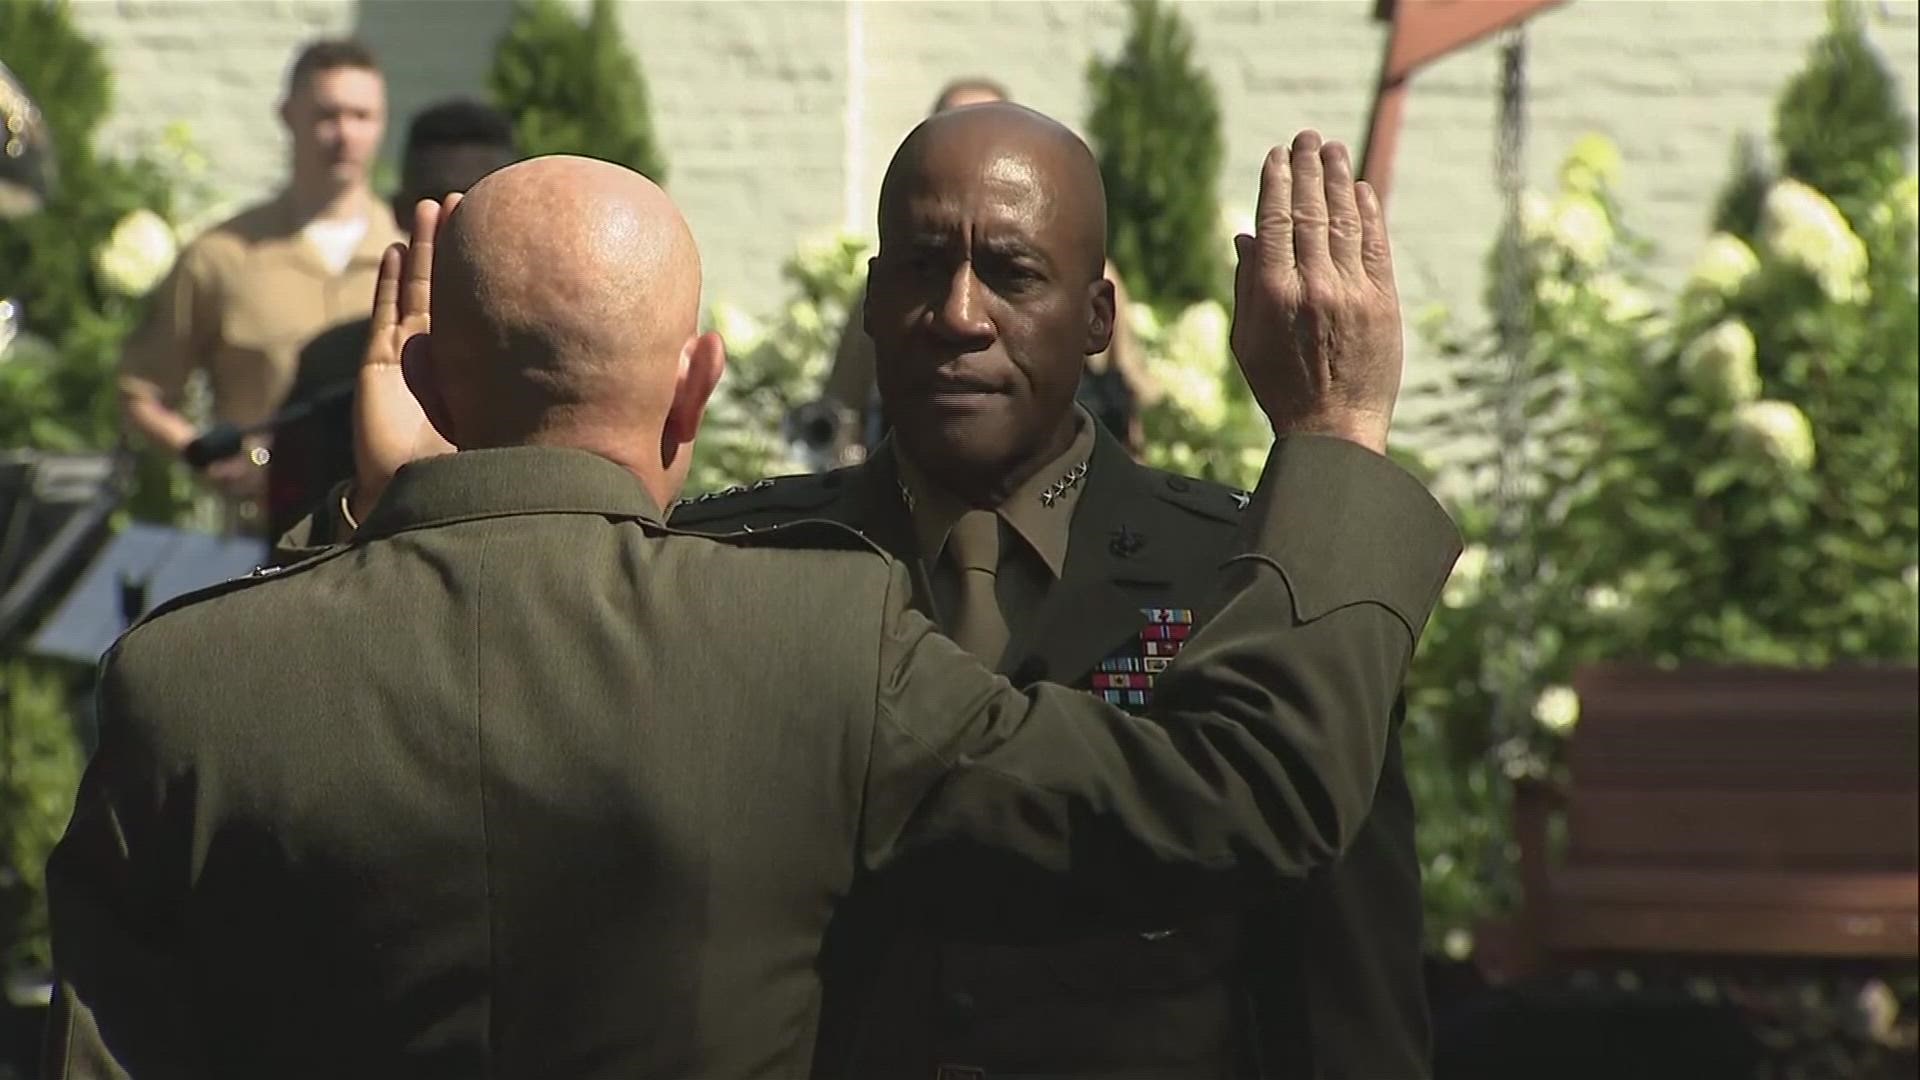 Gen. Langley, who began his career in the Marine Corps as an artillery officer in 1985, is the first Black Marine to be promoted to the rank of General.